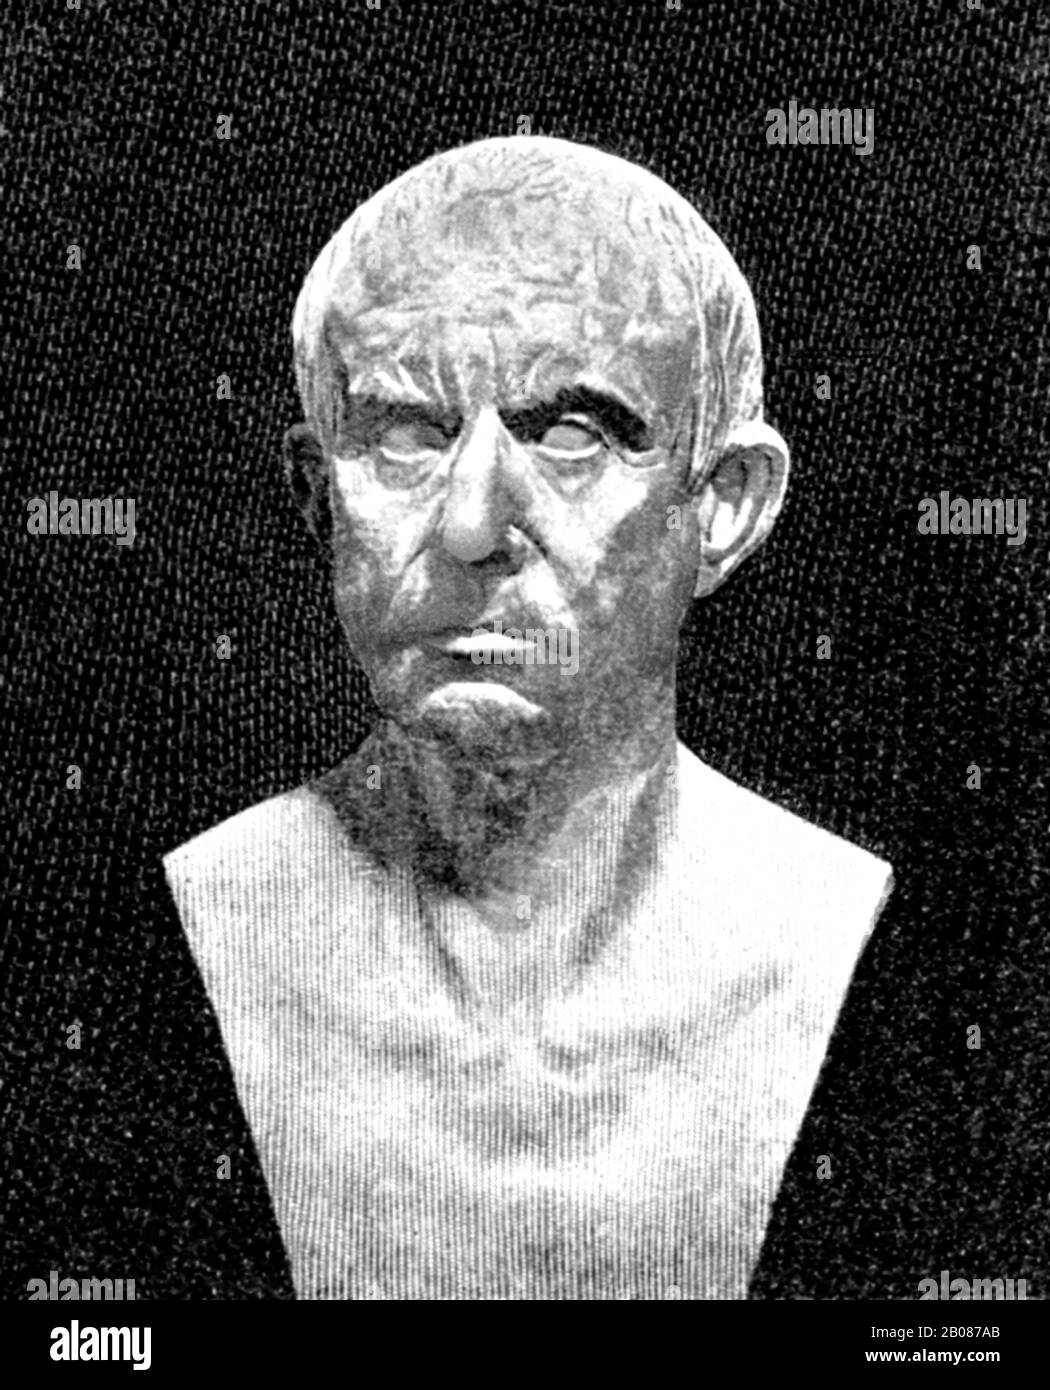 Marcus Porcius Cato (234-149 B.C.) was renowned for his strong opposition to luxury, believing the Hellenic culture threatened Rome. As censor, he scrutinized the conduct of candidates running for office and of military generals. He urged the Romans to destroy Carthage, with the words Carthago delenda est (Carthage must be destroyed). He wrote several books, one a manual on running a farm. Stock Photo